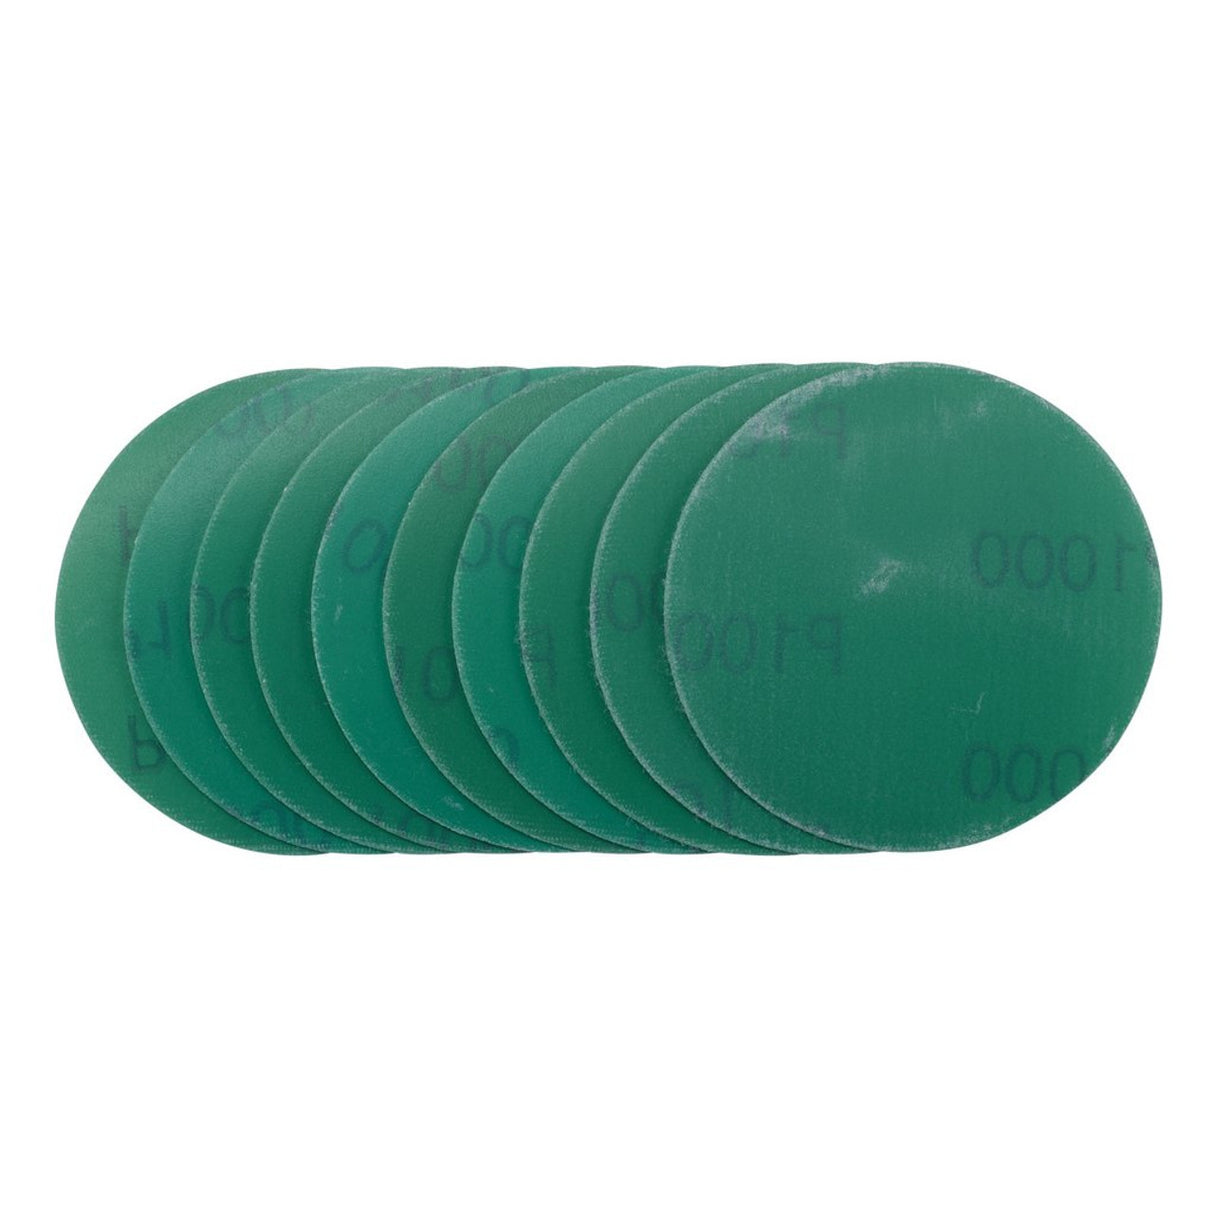 Draper Tools Wet And Dry Sanding Discs With Hook And Loop, 75mm, 1000 Grit (Pack Of 10)